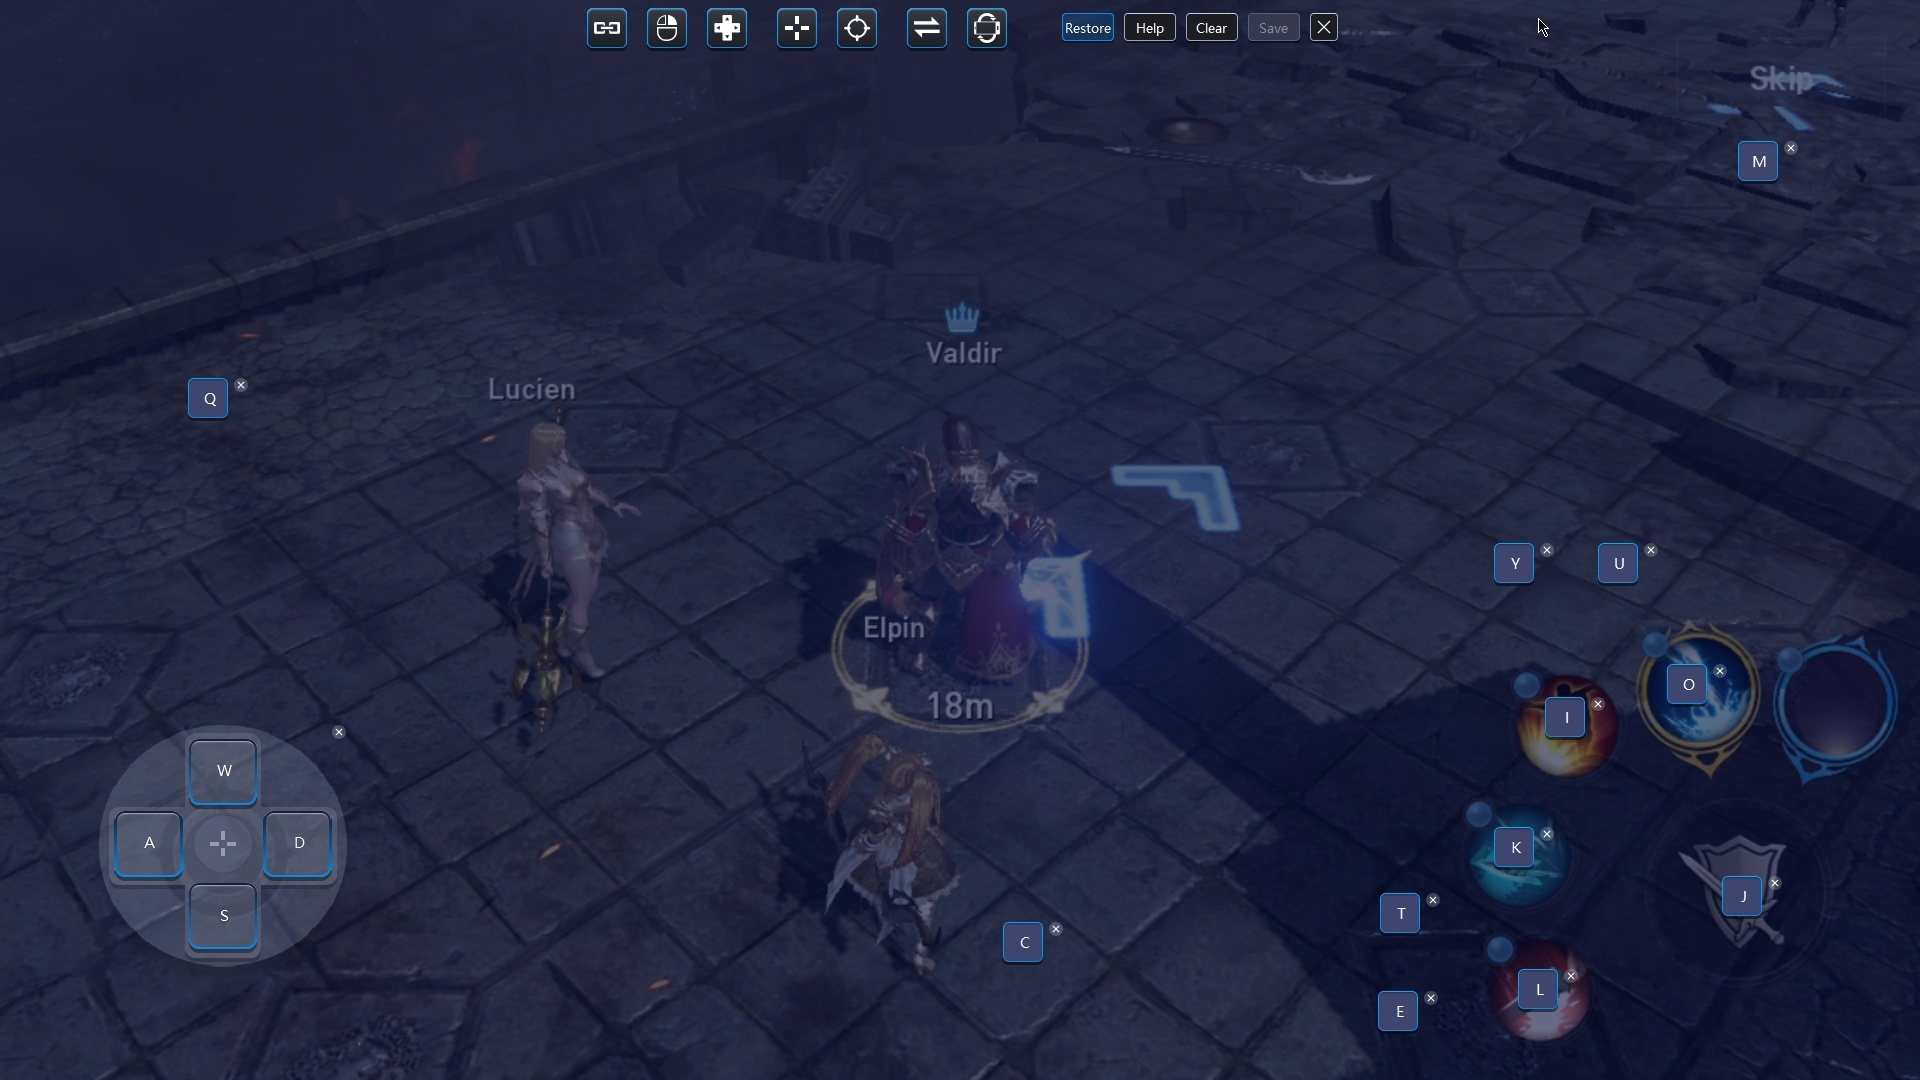 Lineage 2 Revolution Layout and UI Image 3